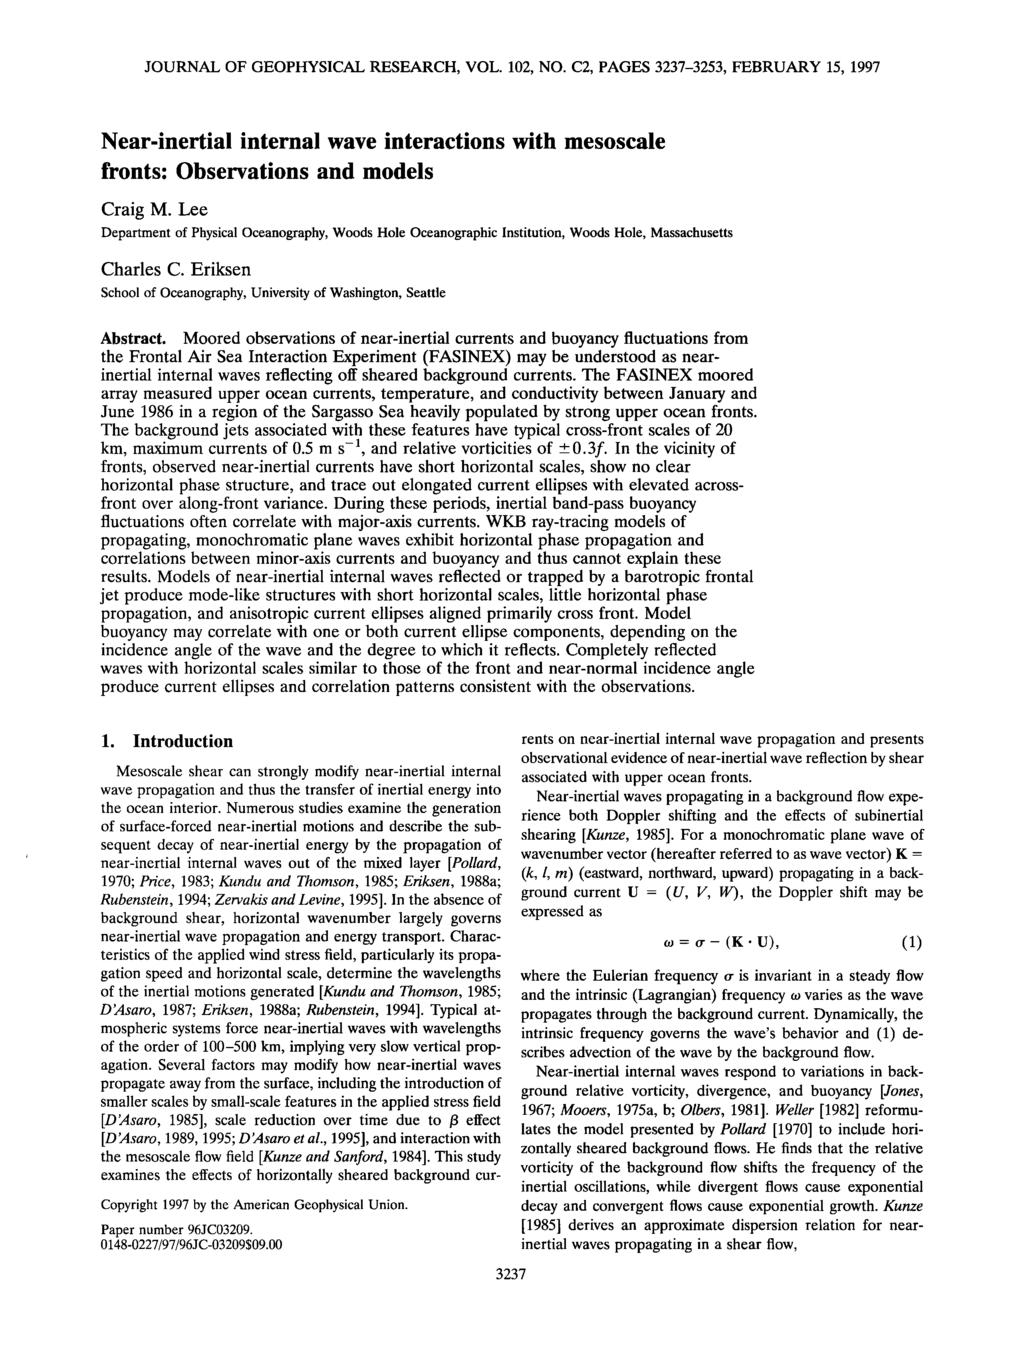 JOURNAL OF GEOPHYSCAL RESEARCH, VOL. 102, NO. C2, PAGES 3237-3253, FEBRUARY 15, 1997 Near-nertal nternal wave nteractons wth mesoscale fronts: Observatons and models Crag M.